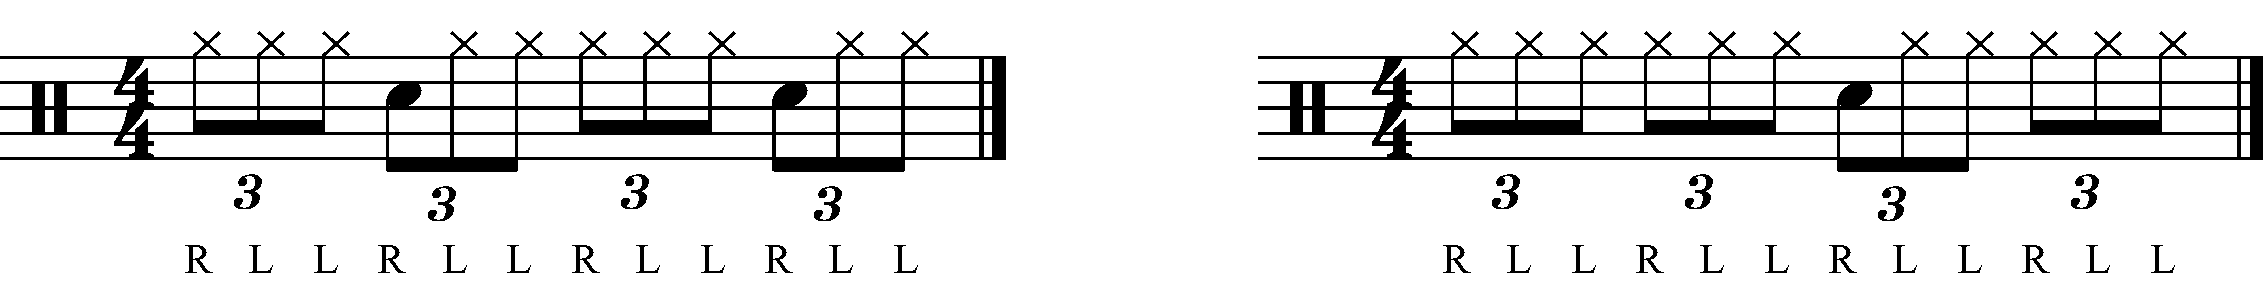 The hand placements for a standard triplet 16 beat groove